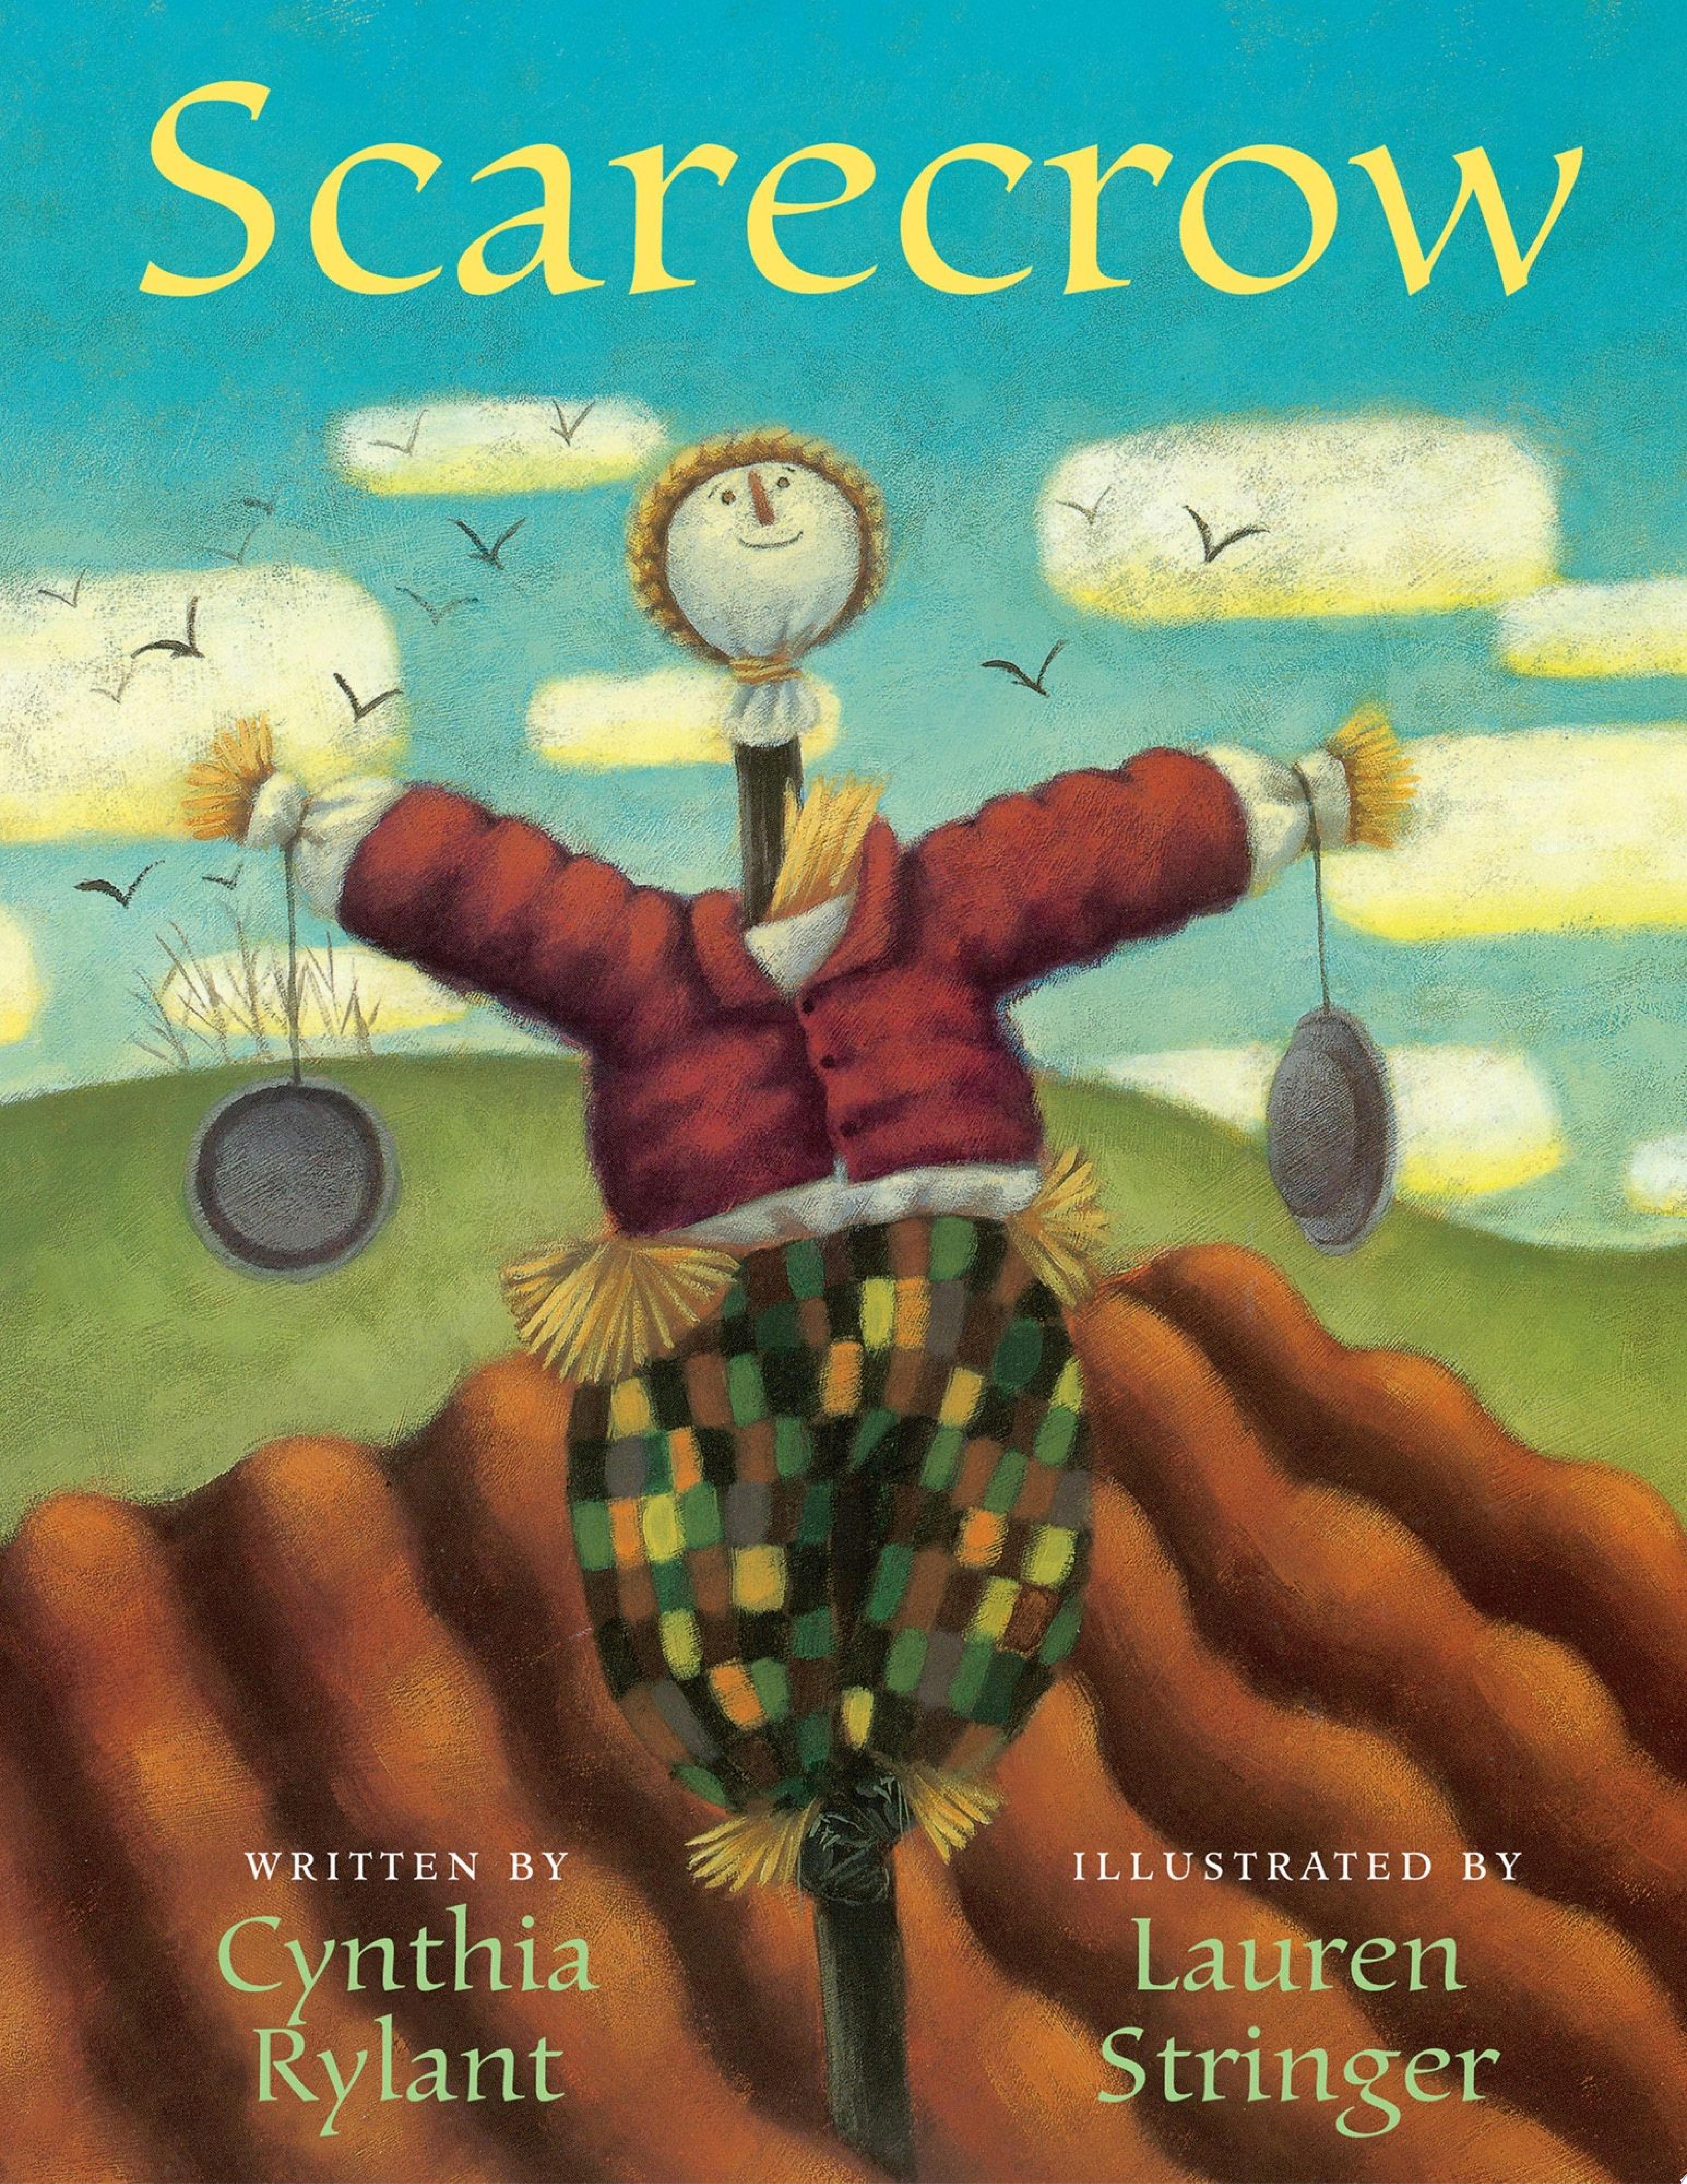 Image for "Scarecrow"